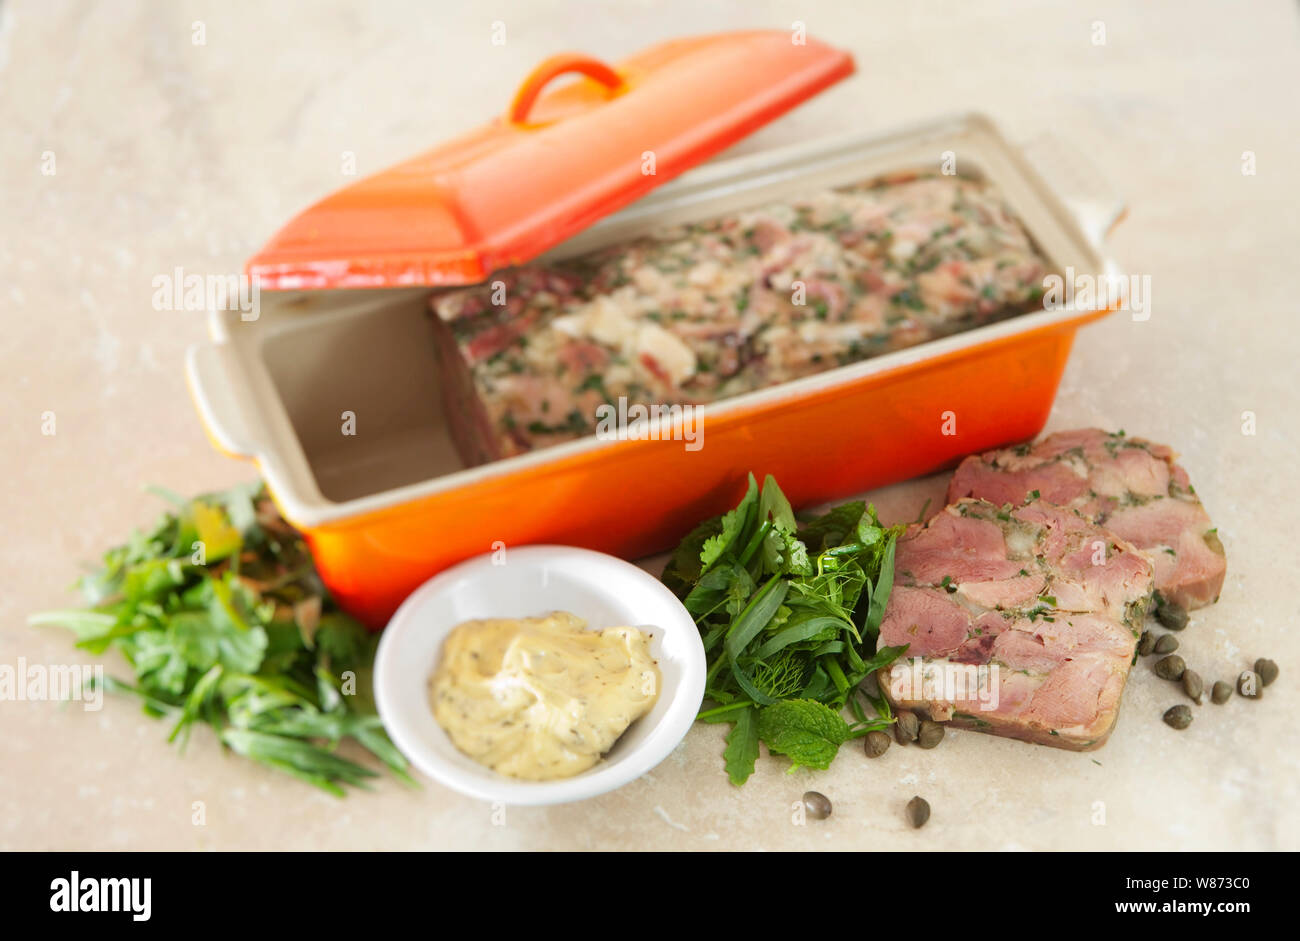 home made ham hock terrine in an orange terrine dish served with mayonnaise and herbs. Stock Photo